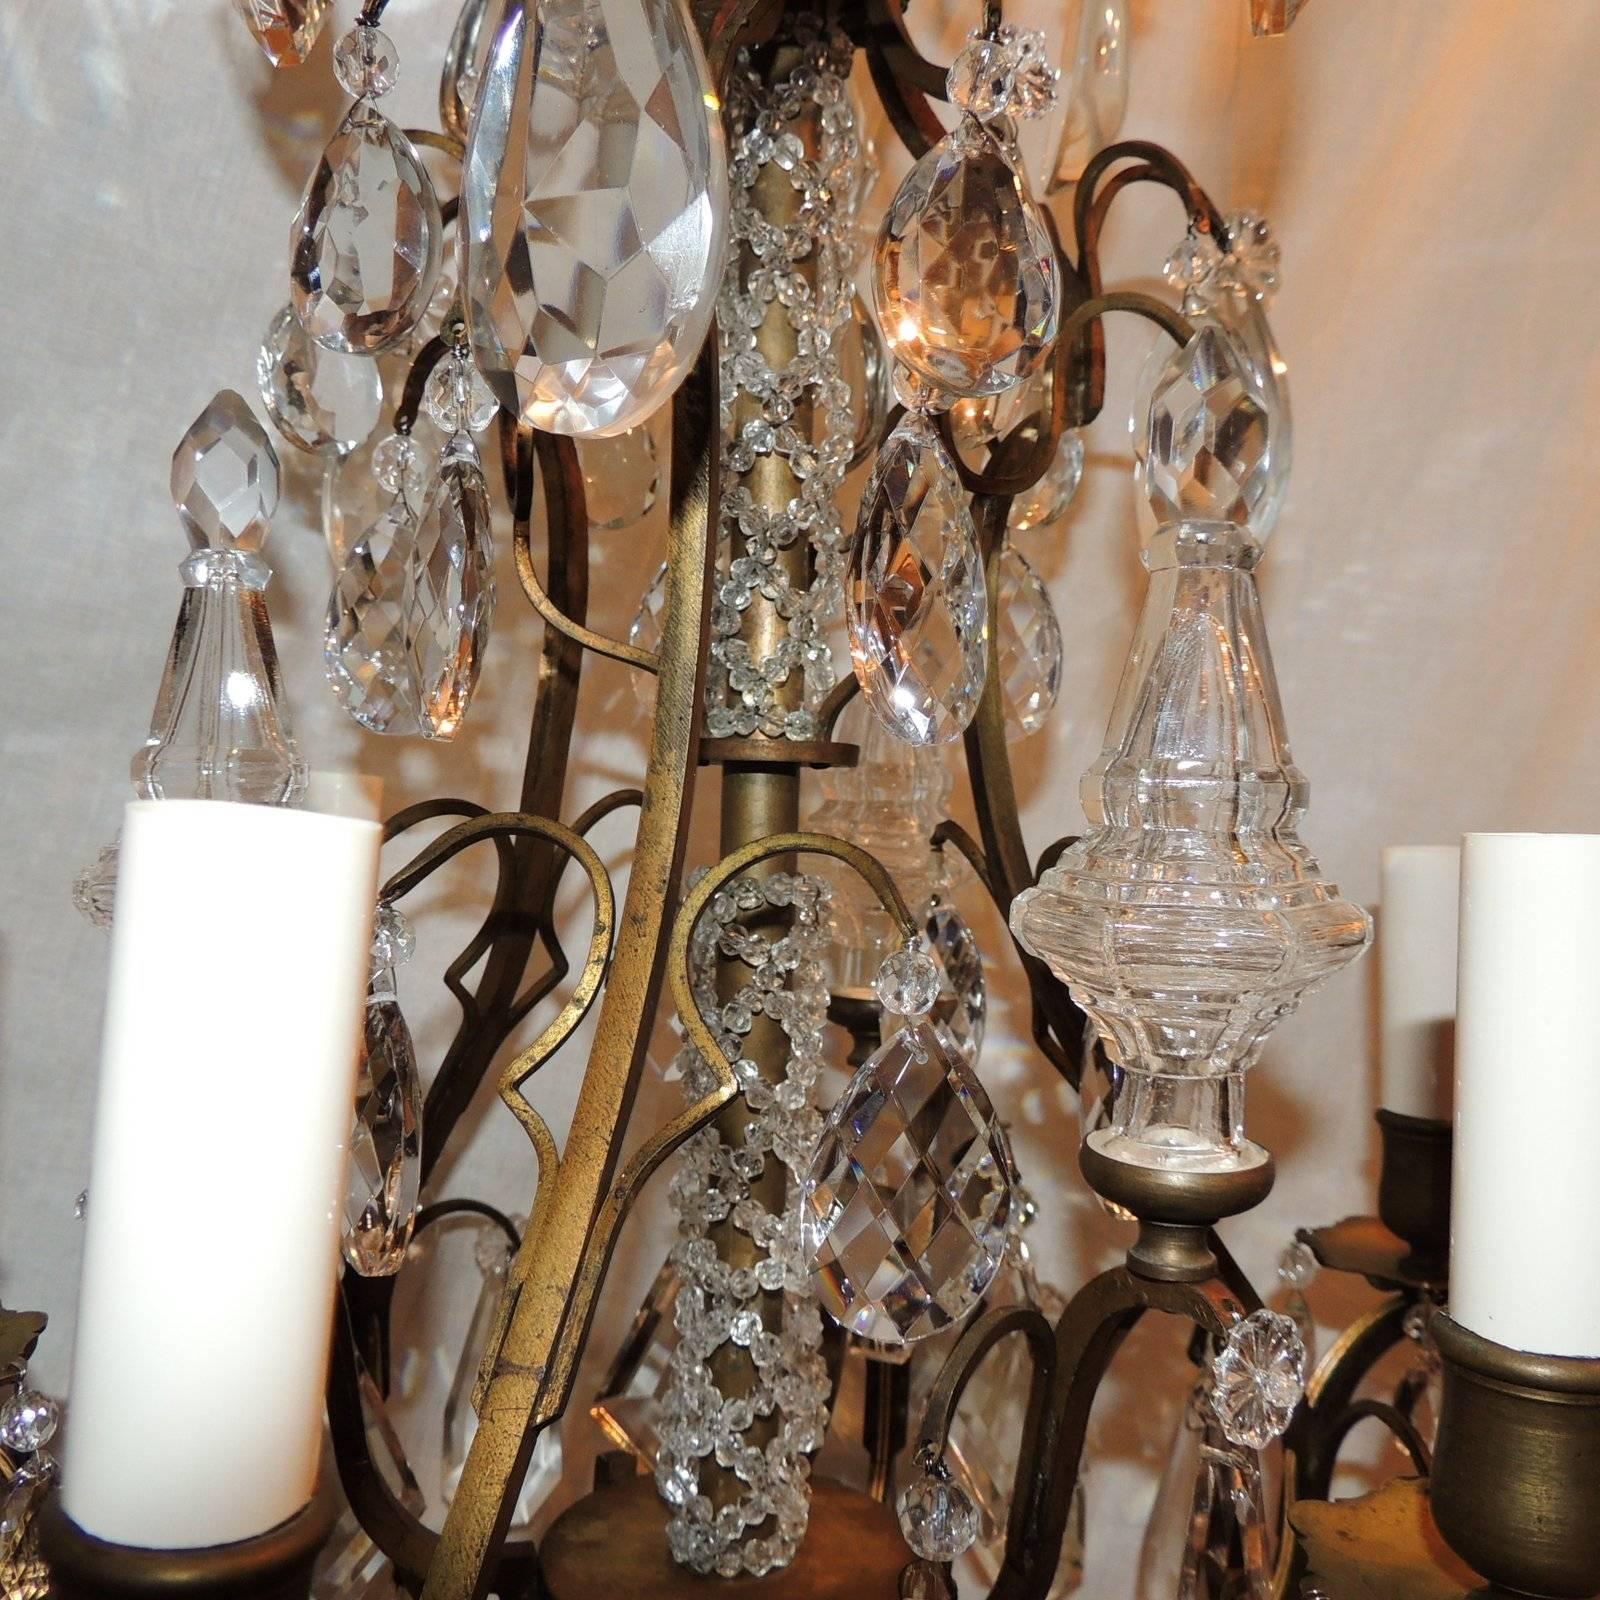 Mid-20th Century Wonderful French Patina Bronze Crystal Six Arm Beaded Obelisk Chandelier Fixture